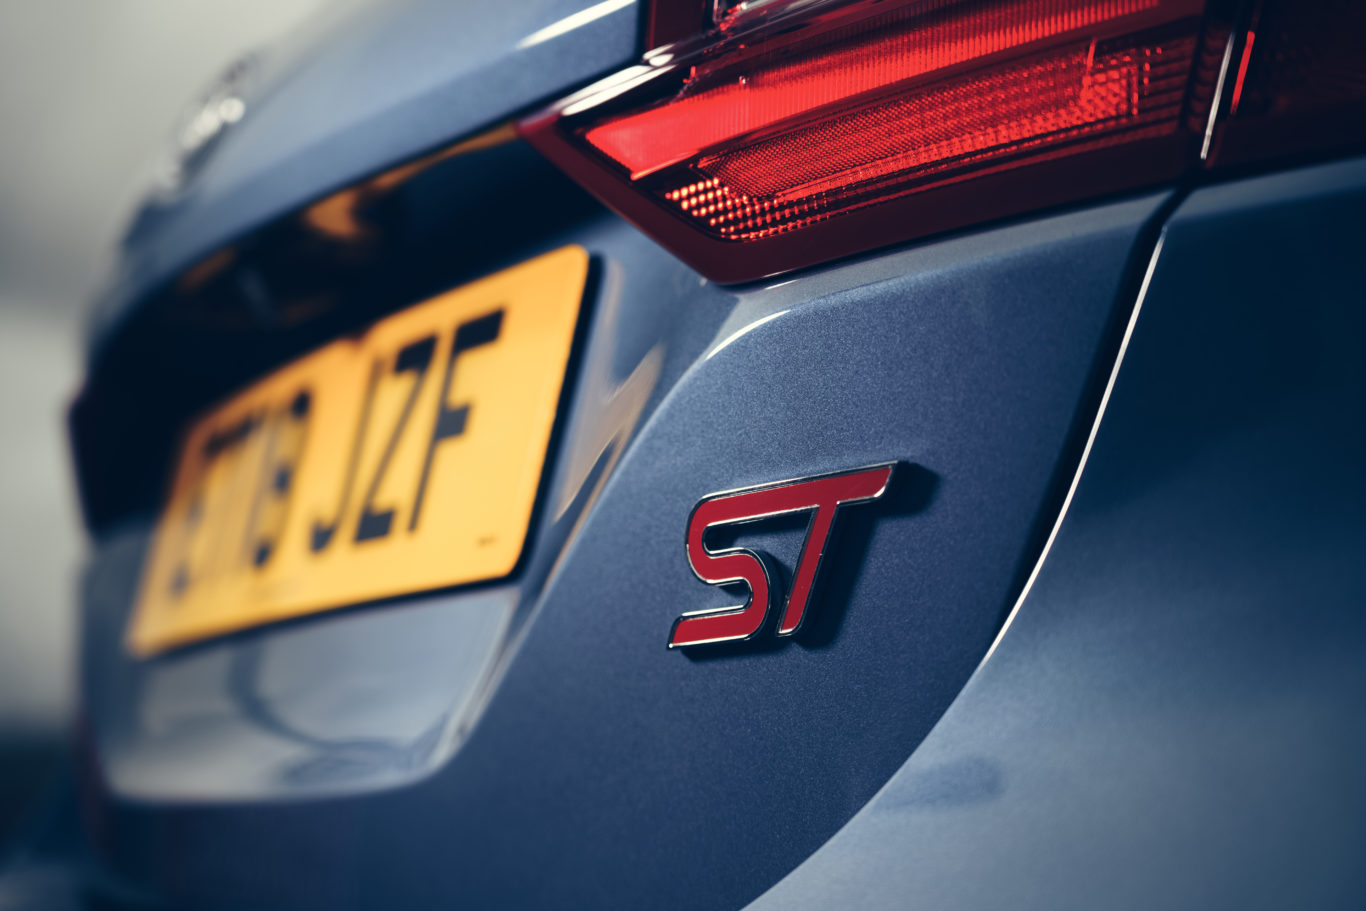 This is the third-generation Fiesta ST